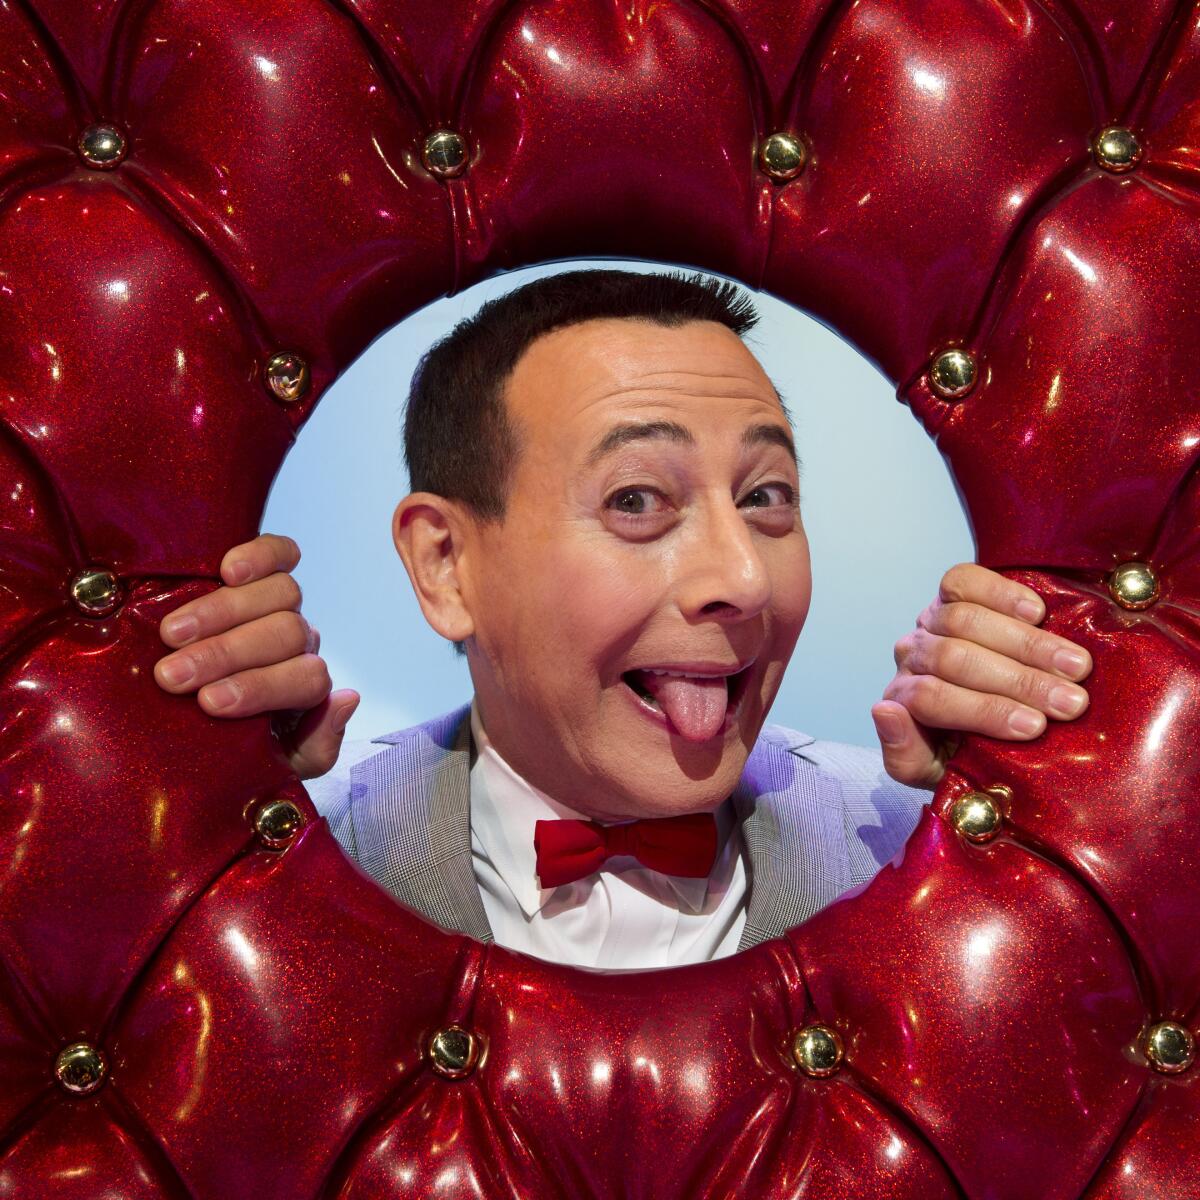 A man in a red bowtie sticks his tongue out and pokes his head through a hole in an upholstered red donut.